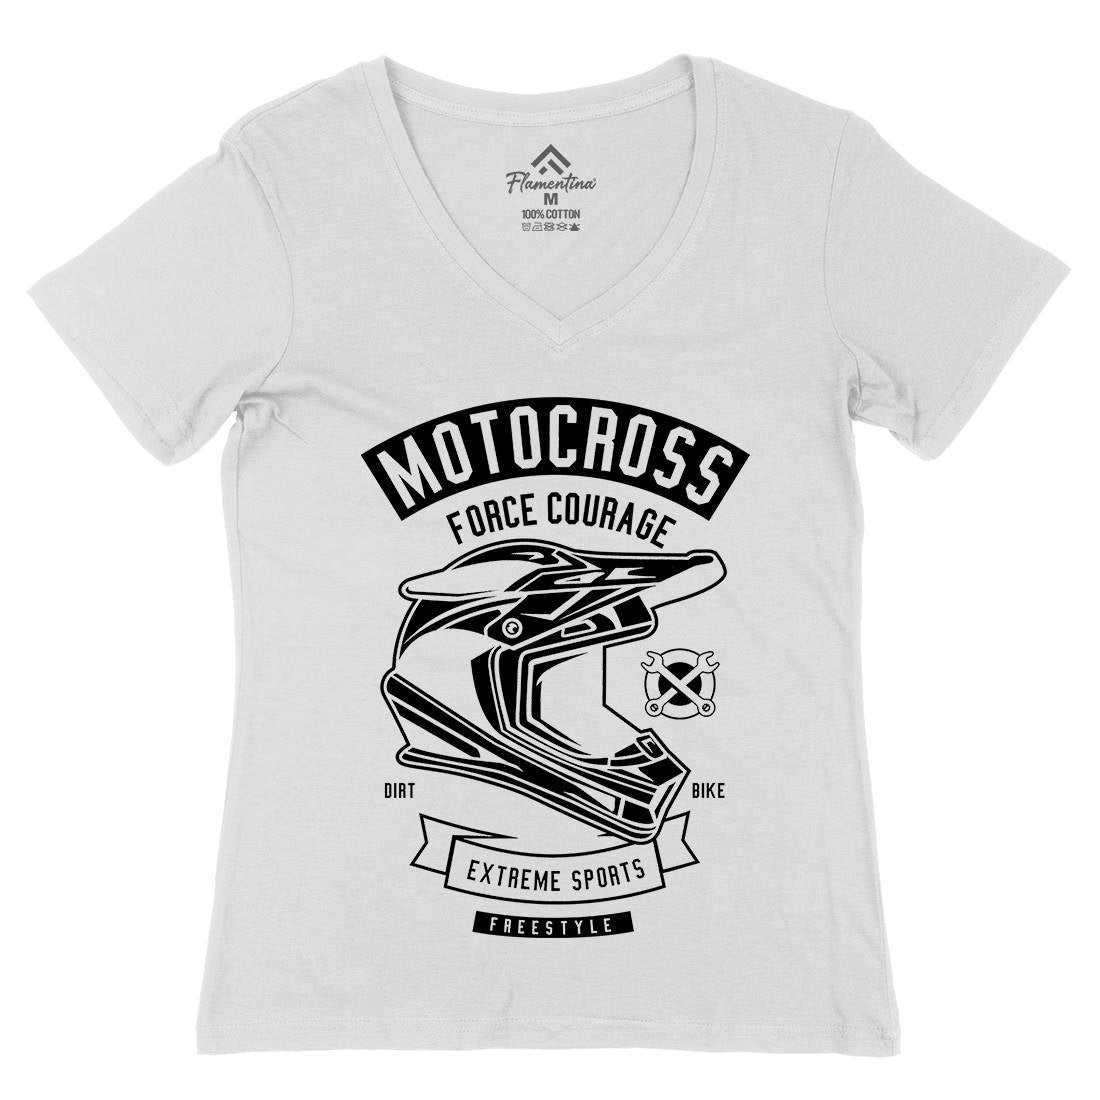 Motocross Force Courage Womens Organic V-Neck T-Shirt Motorcycles B576